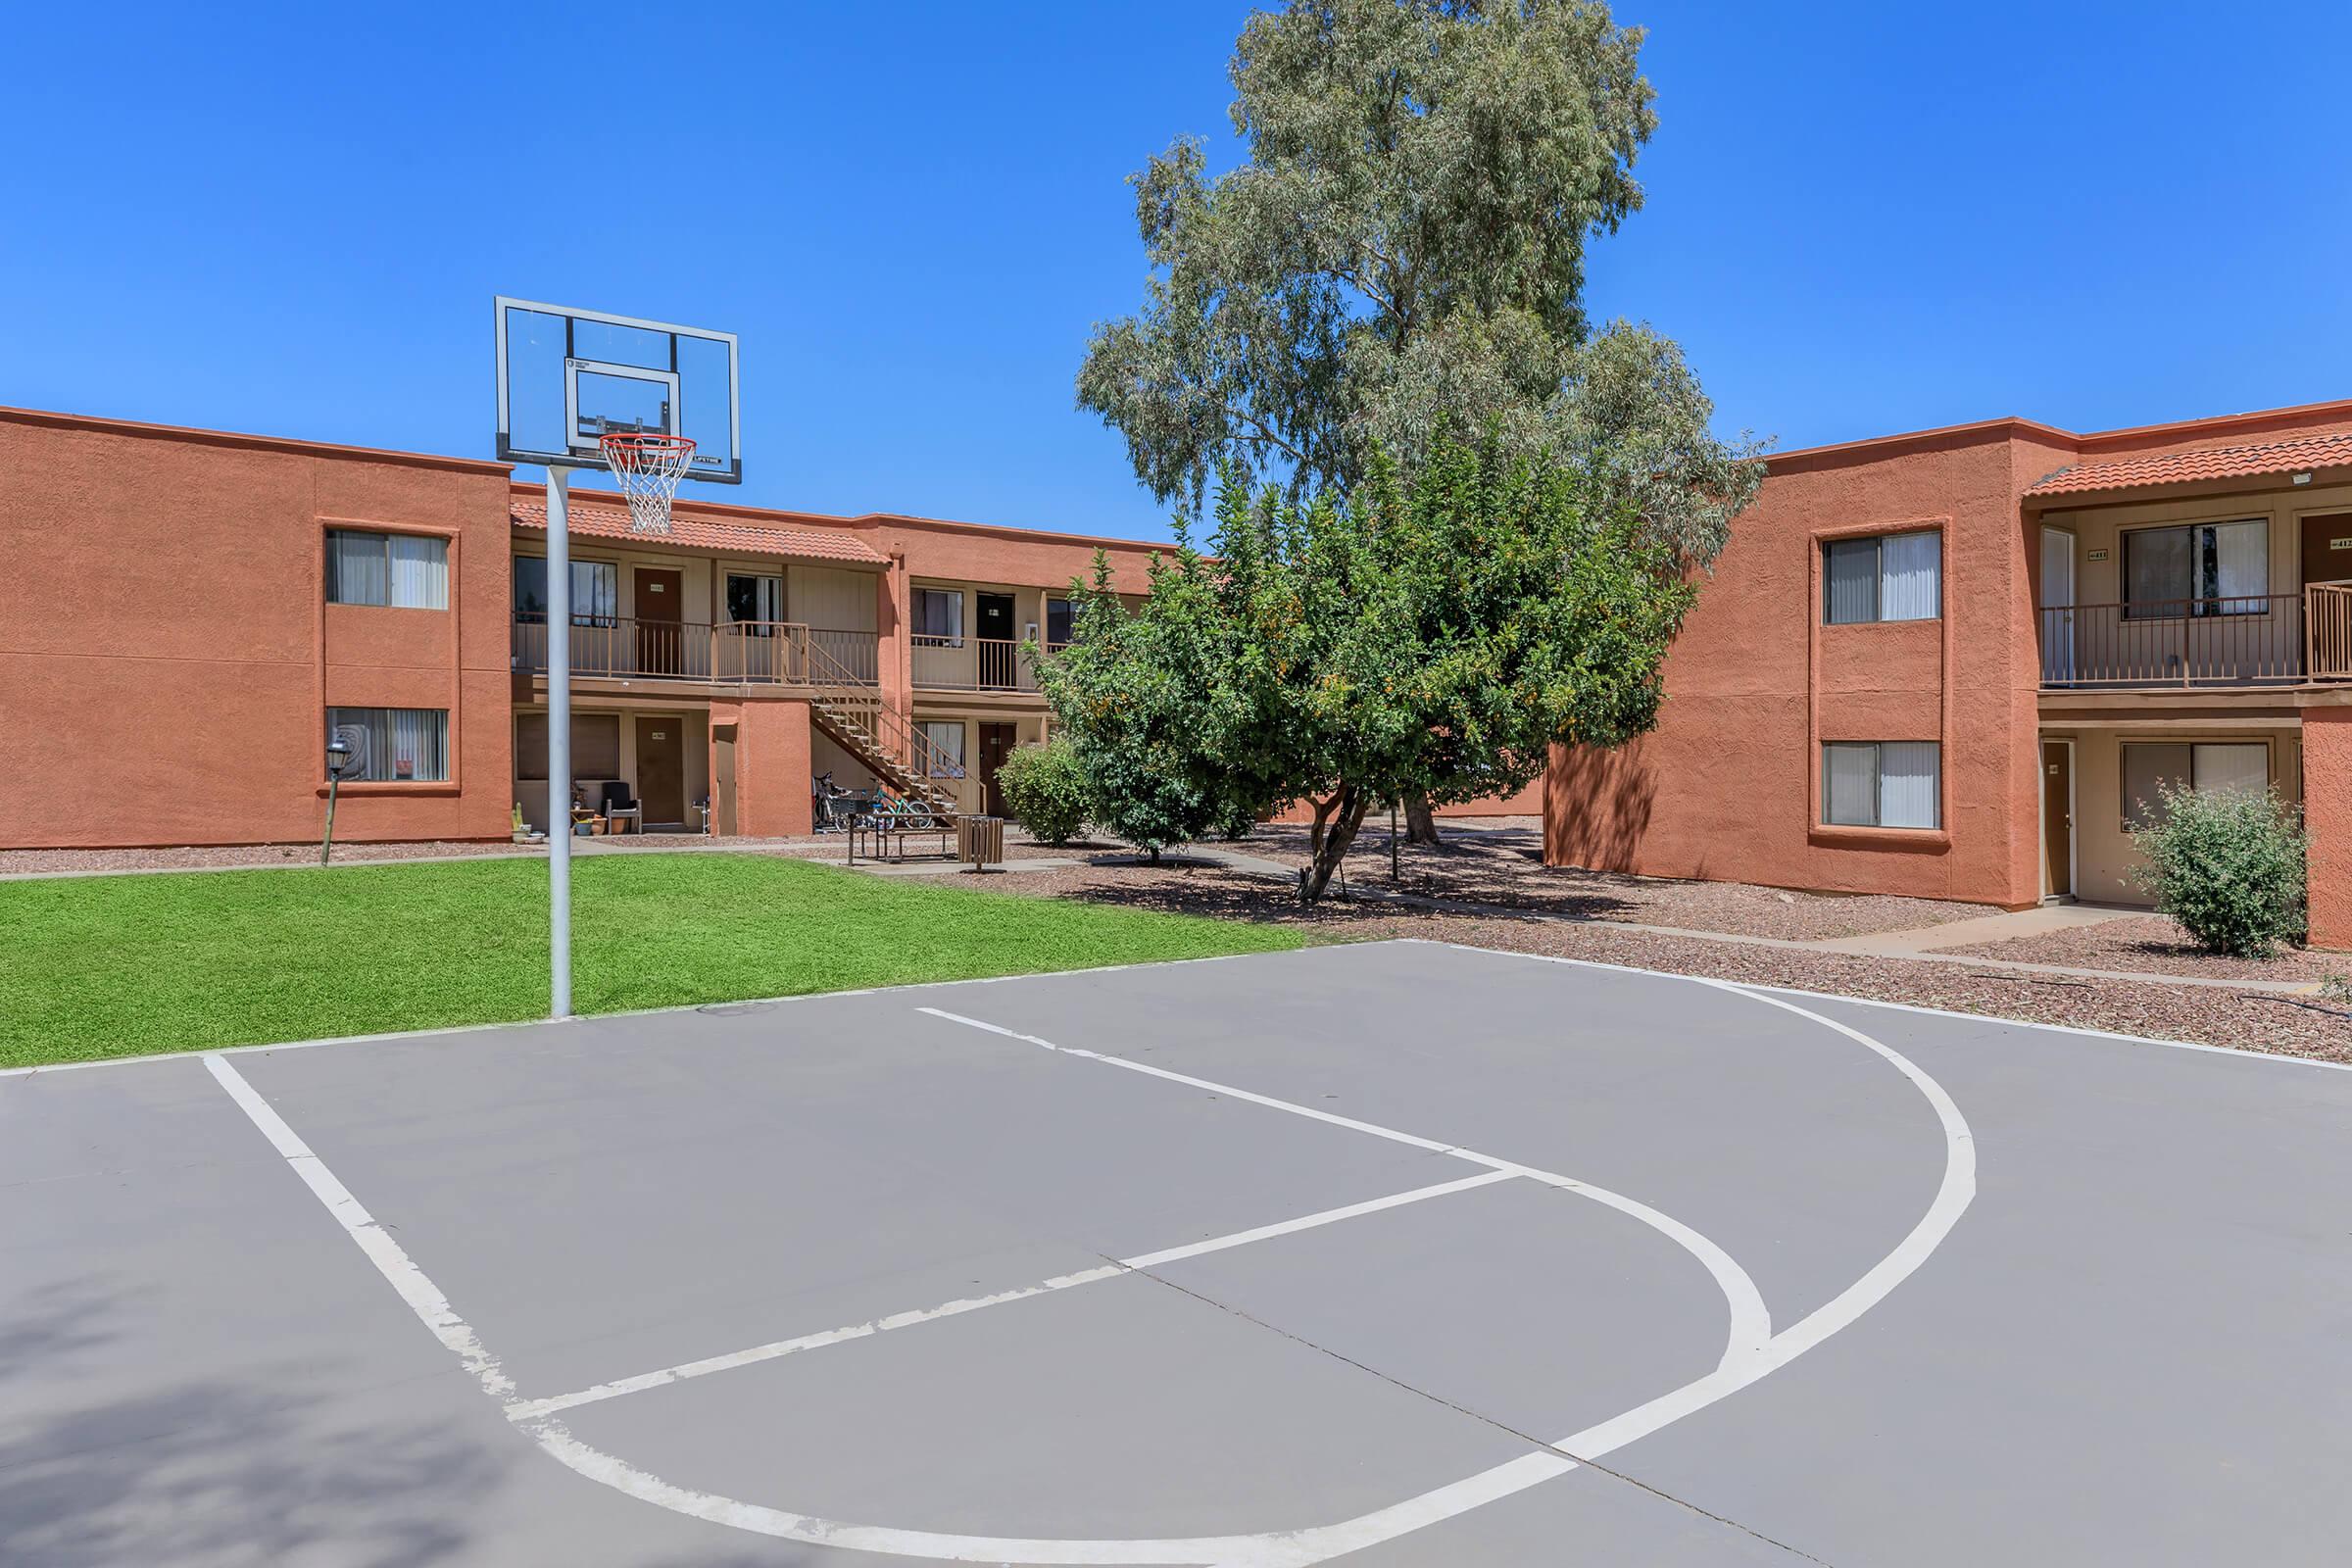 a large brick building with a basketball